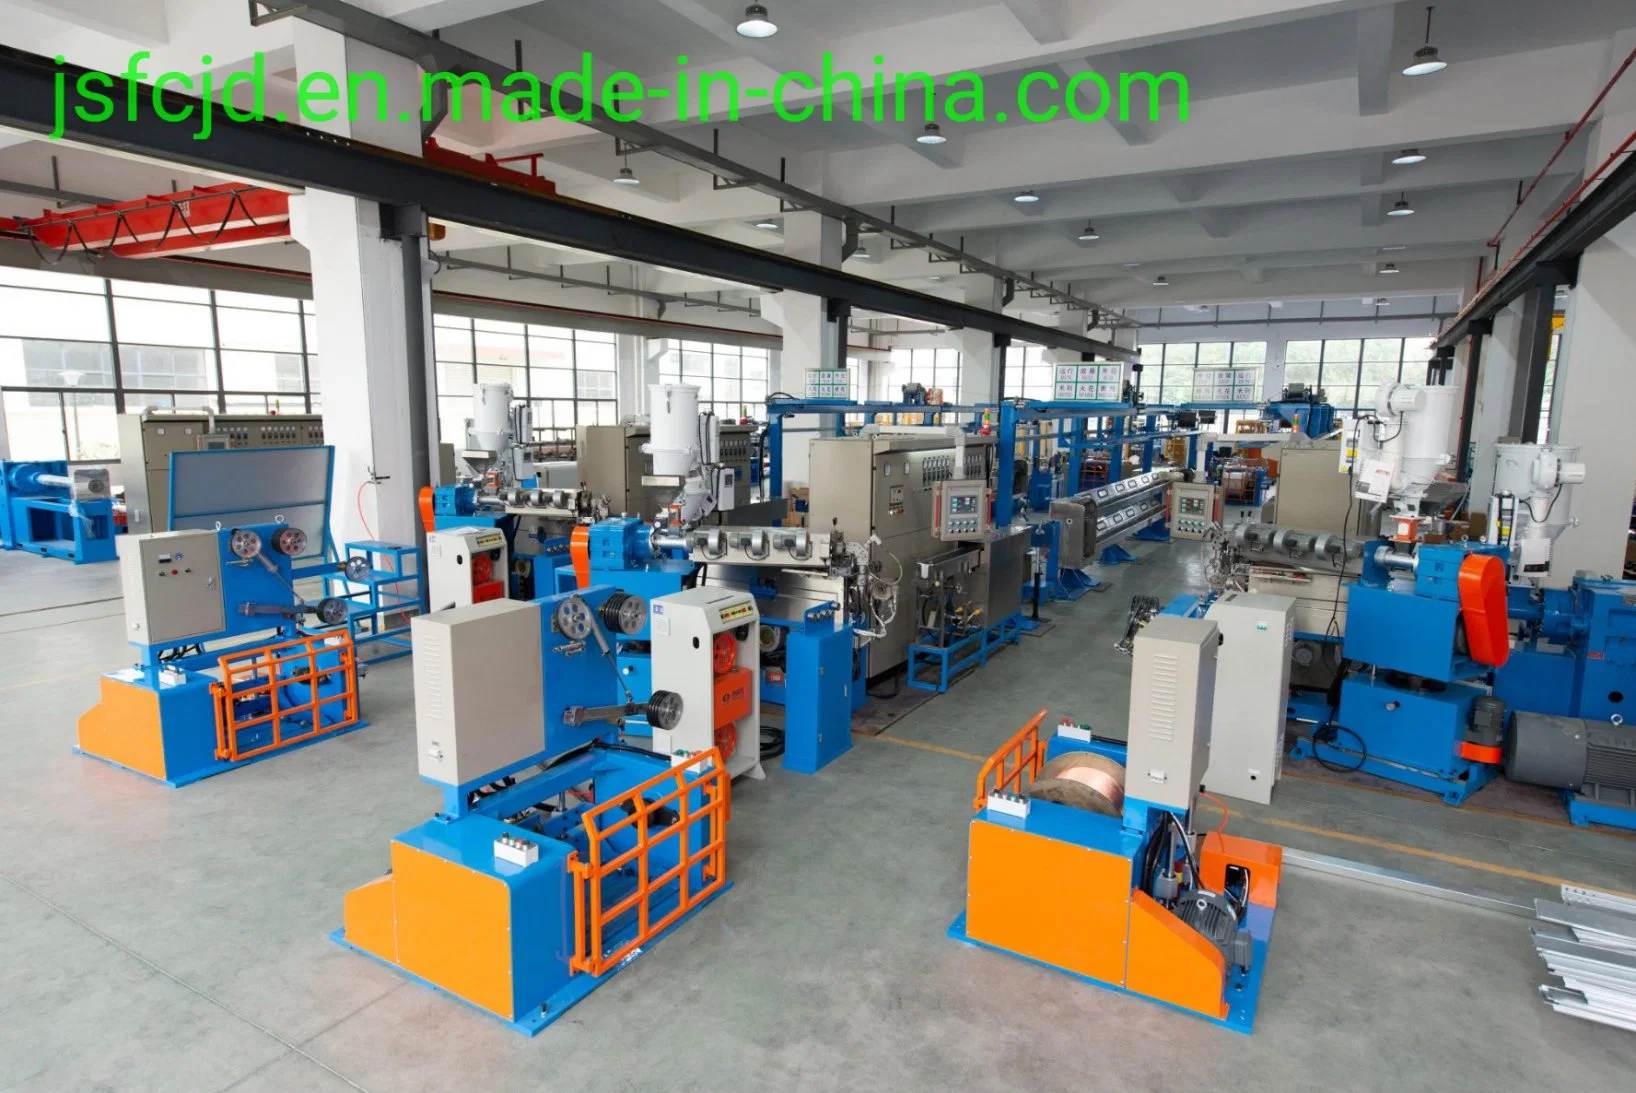 1.0-15.0mm Cable Plastic Core Wire Extruder Extrusion Winding Twisting Bunching Stranding Machine